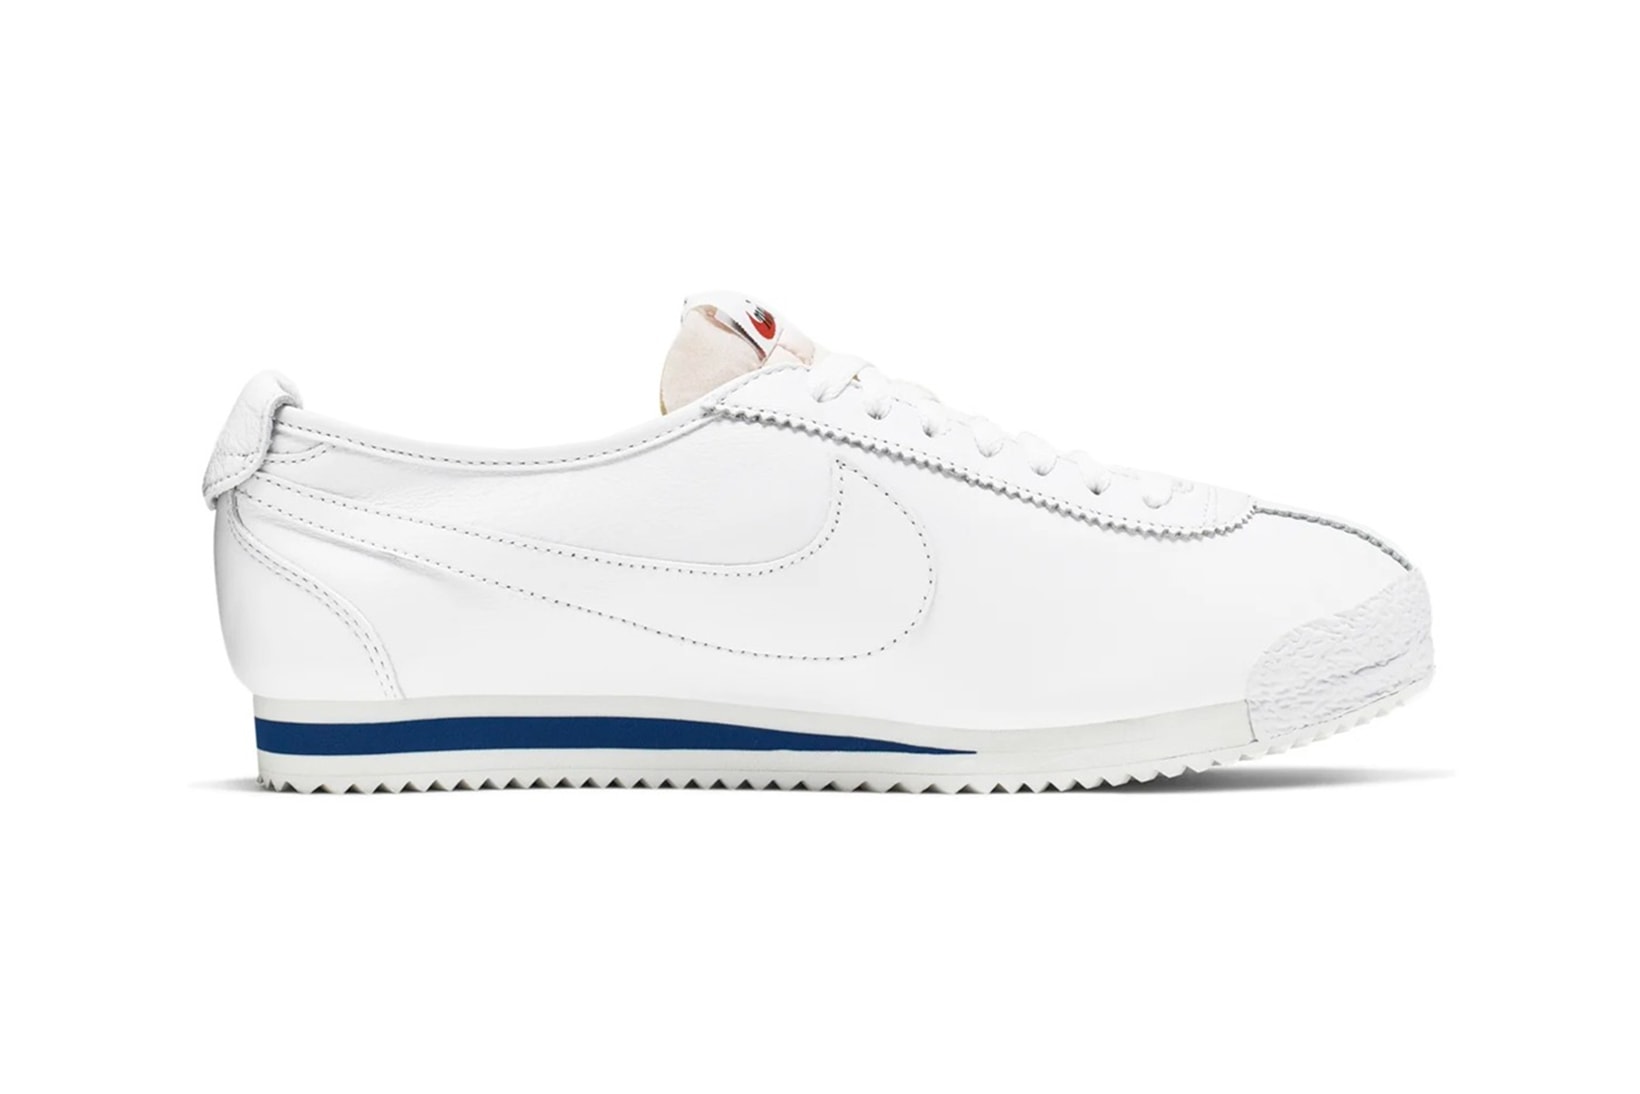 nike classic cortez shoe dog pack falcon dimension six sneakers white red blue colorway